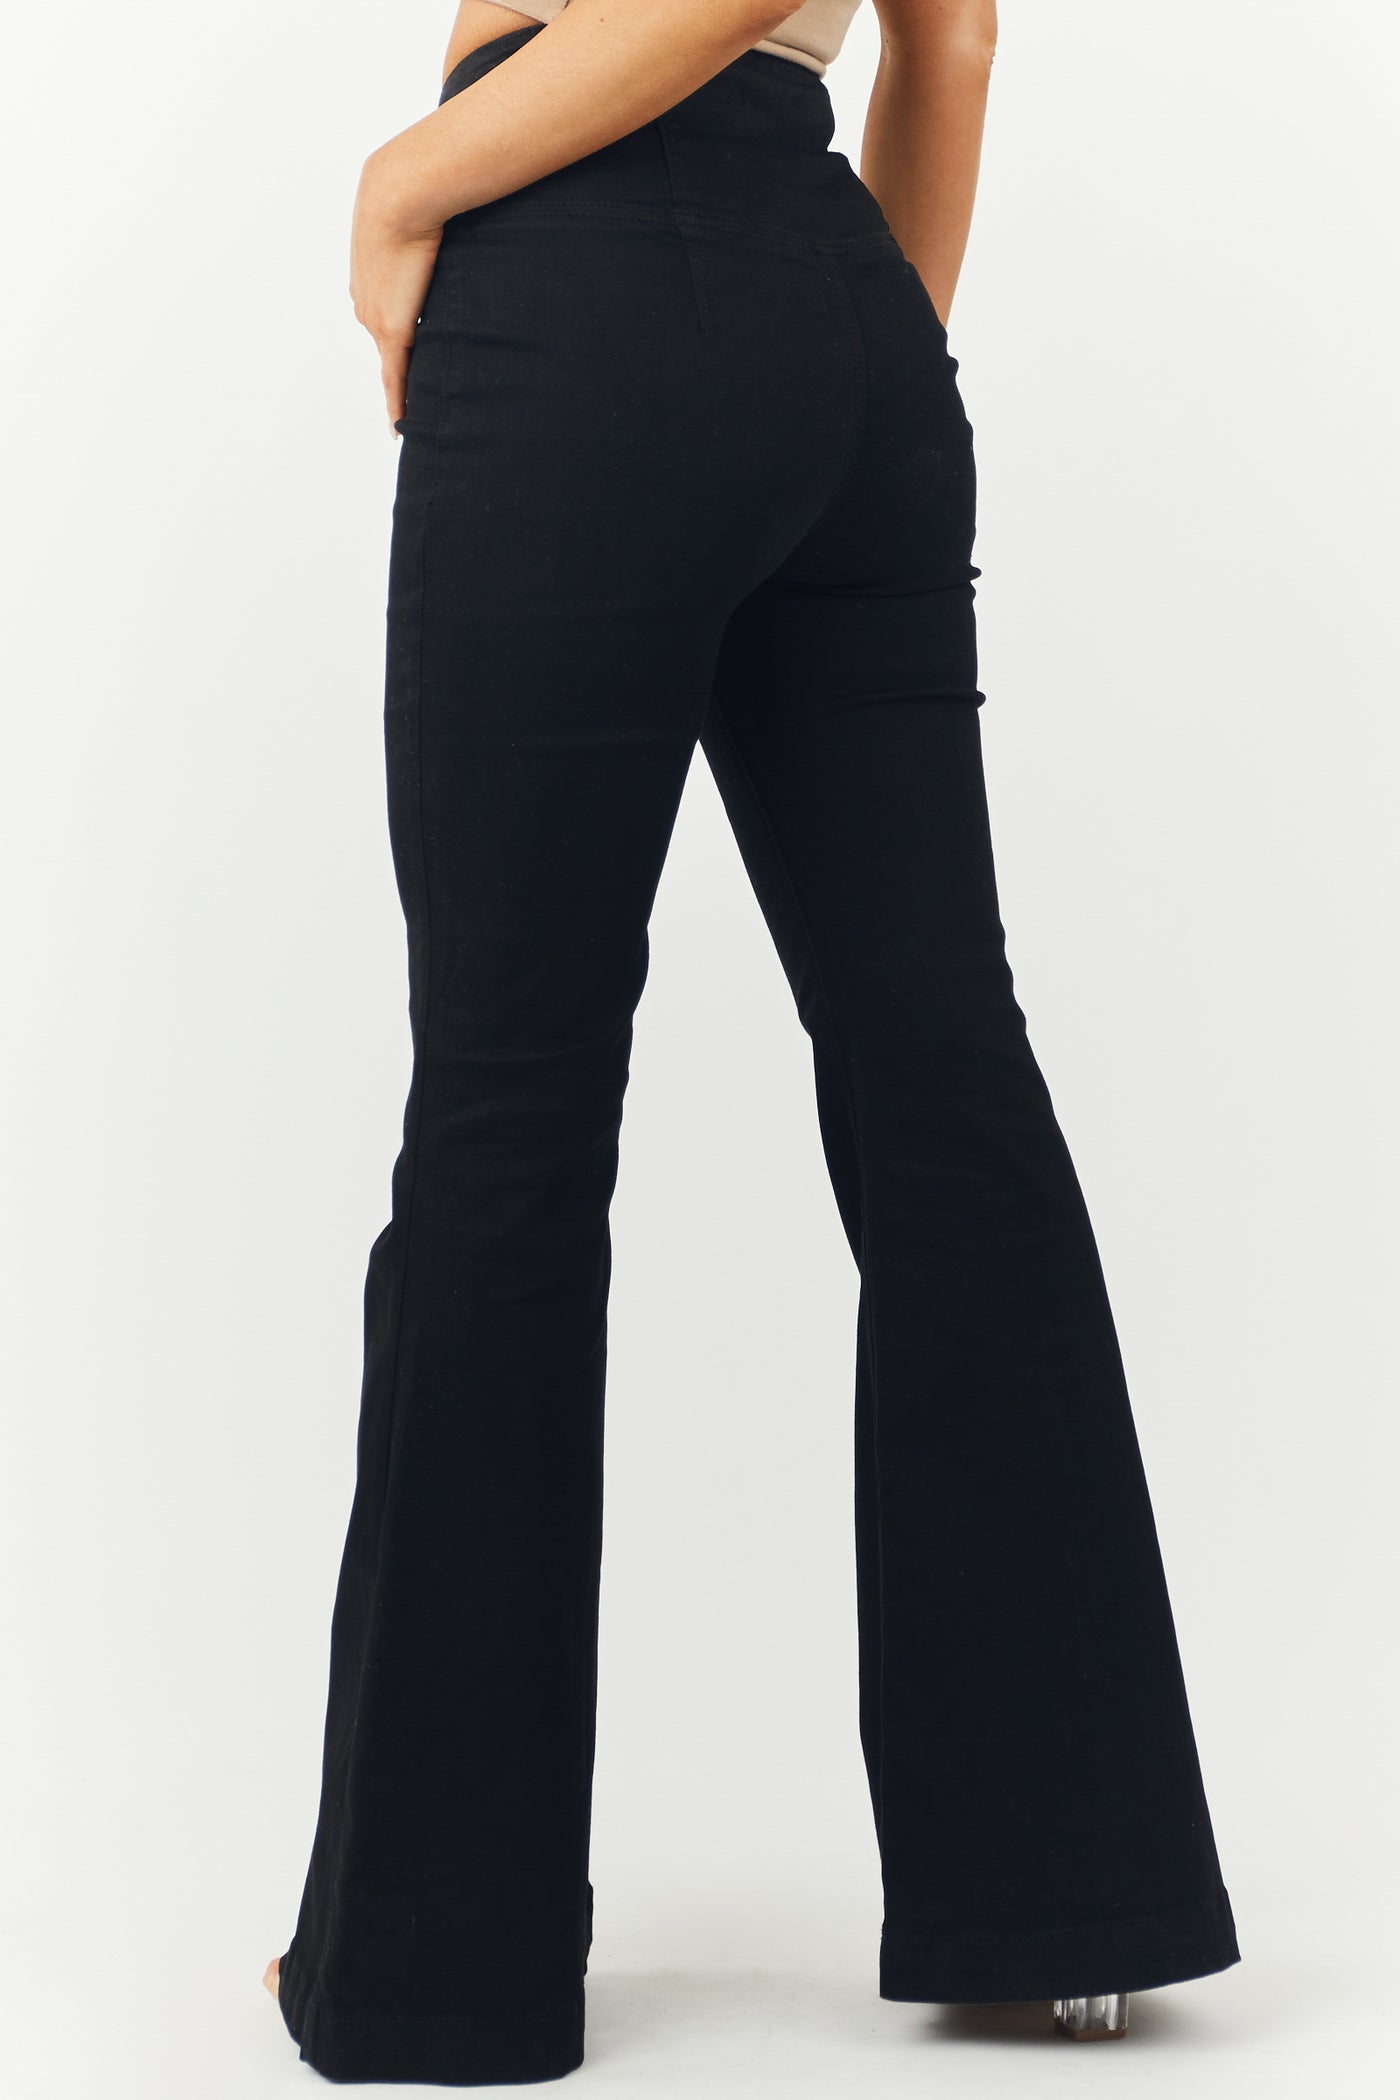 Black High Rise Crossover Waist Flare Jeans